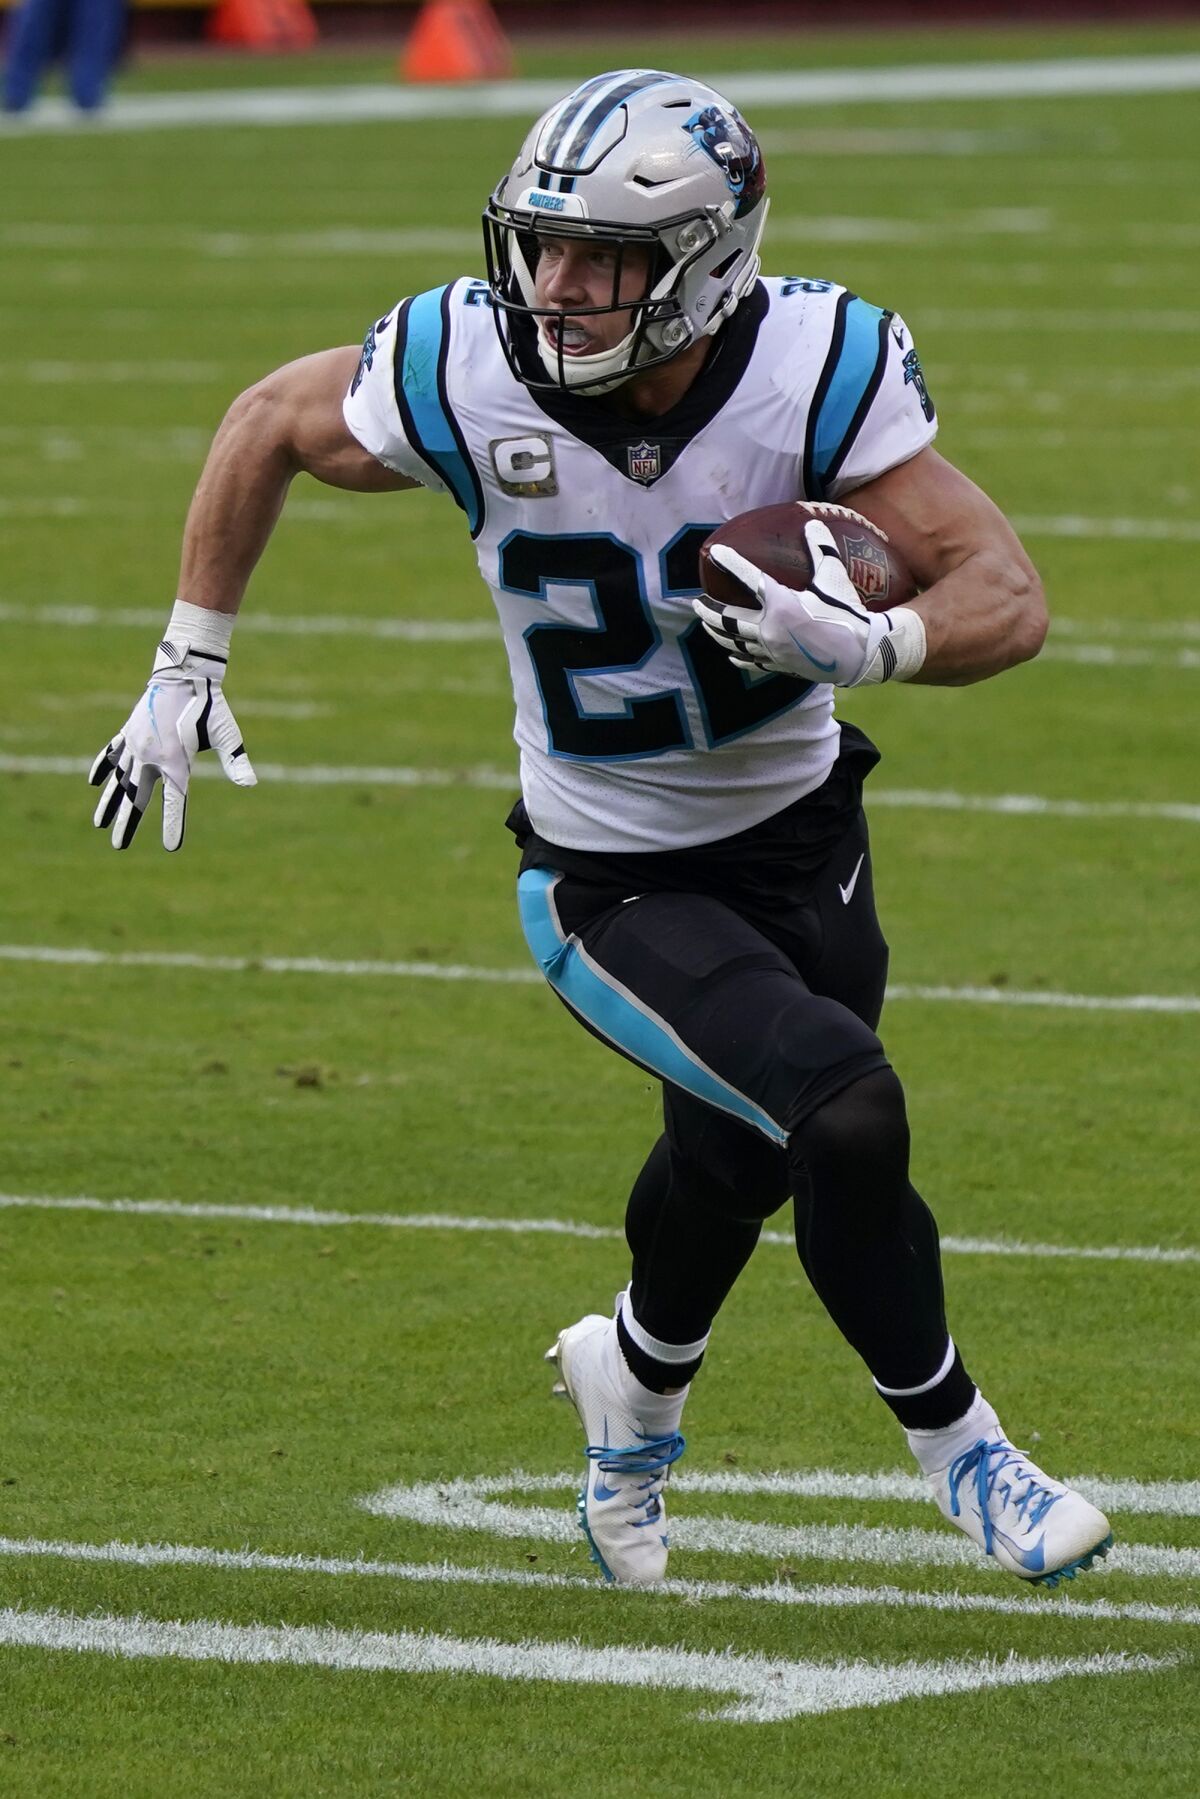 Carolina Panthers running back Christian McCaffrey (22) runs toward the end zone to score against the Kansas City Chiefs during the first half of an NFL football game in Kansas City, Mo., Sunday, Nov. 8, 2020. (AP Photo/Jeff Roberson)